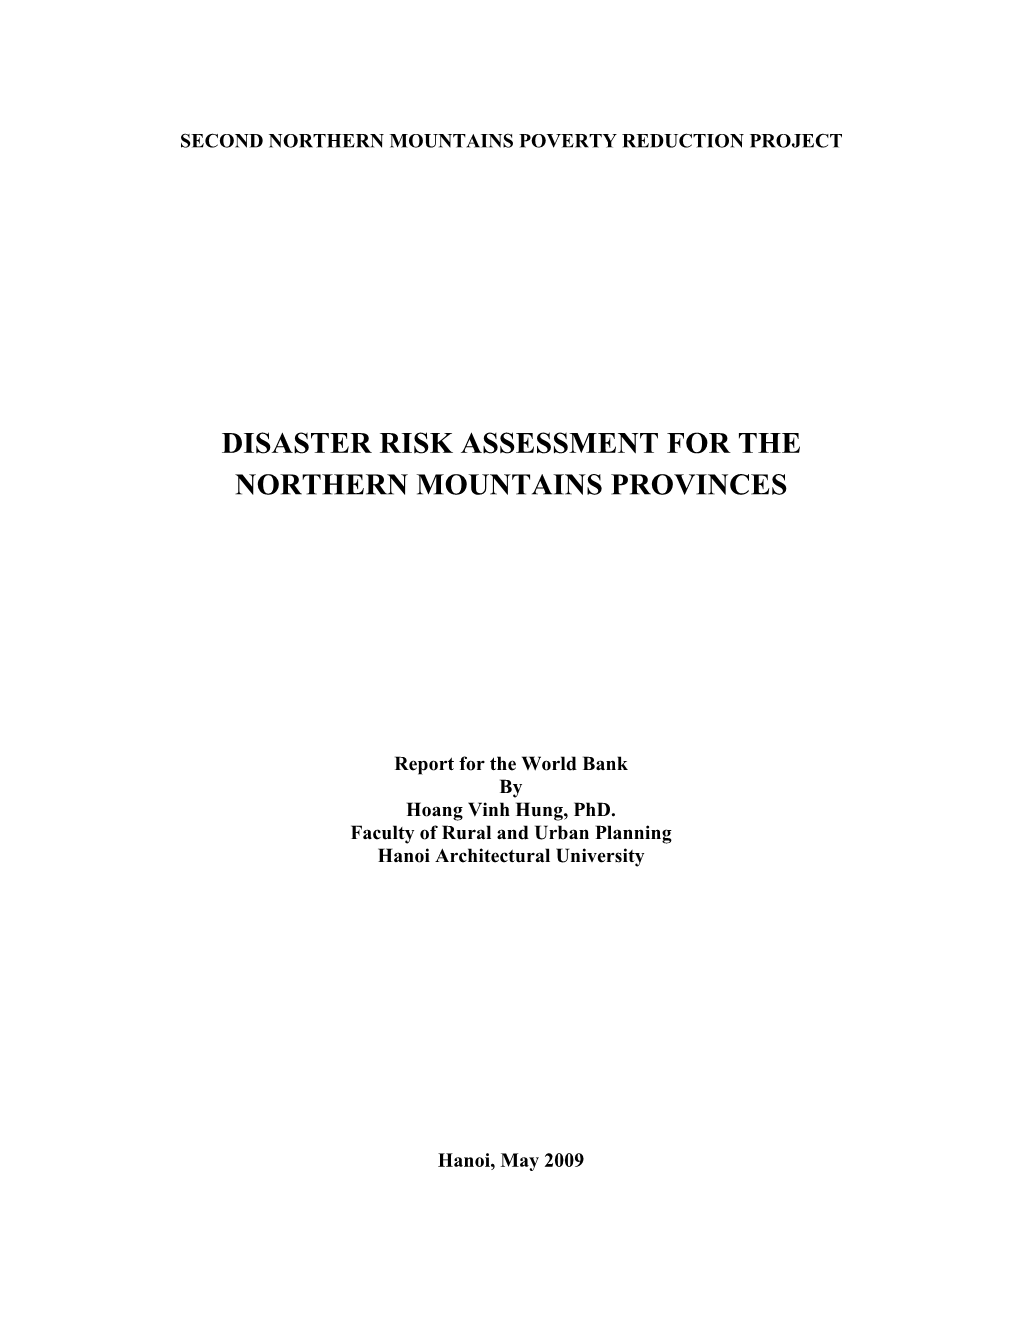 Disaster Risk Assessment for the Northern Mountains Provinces